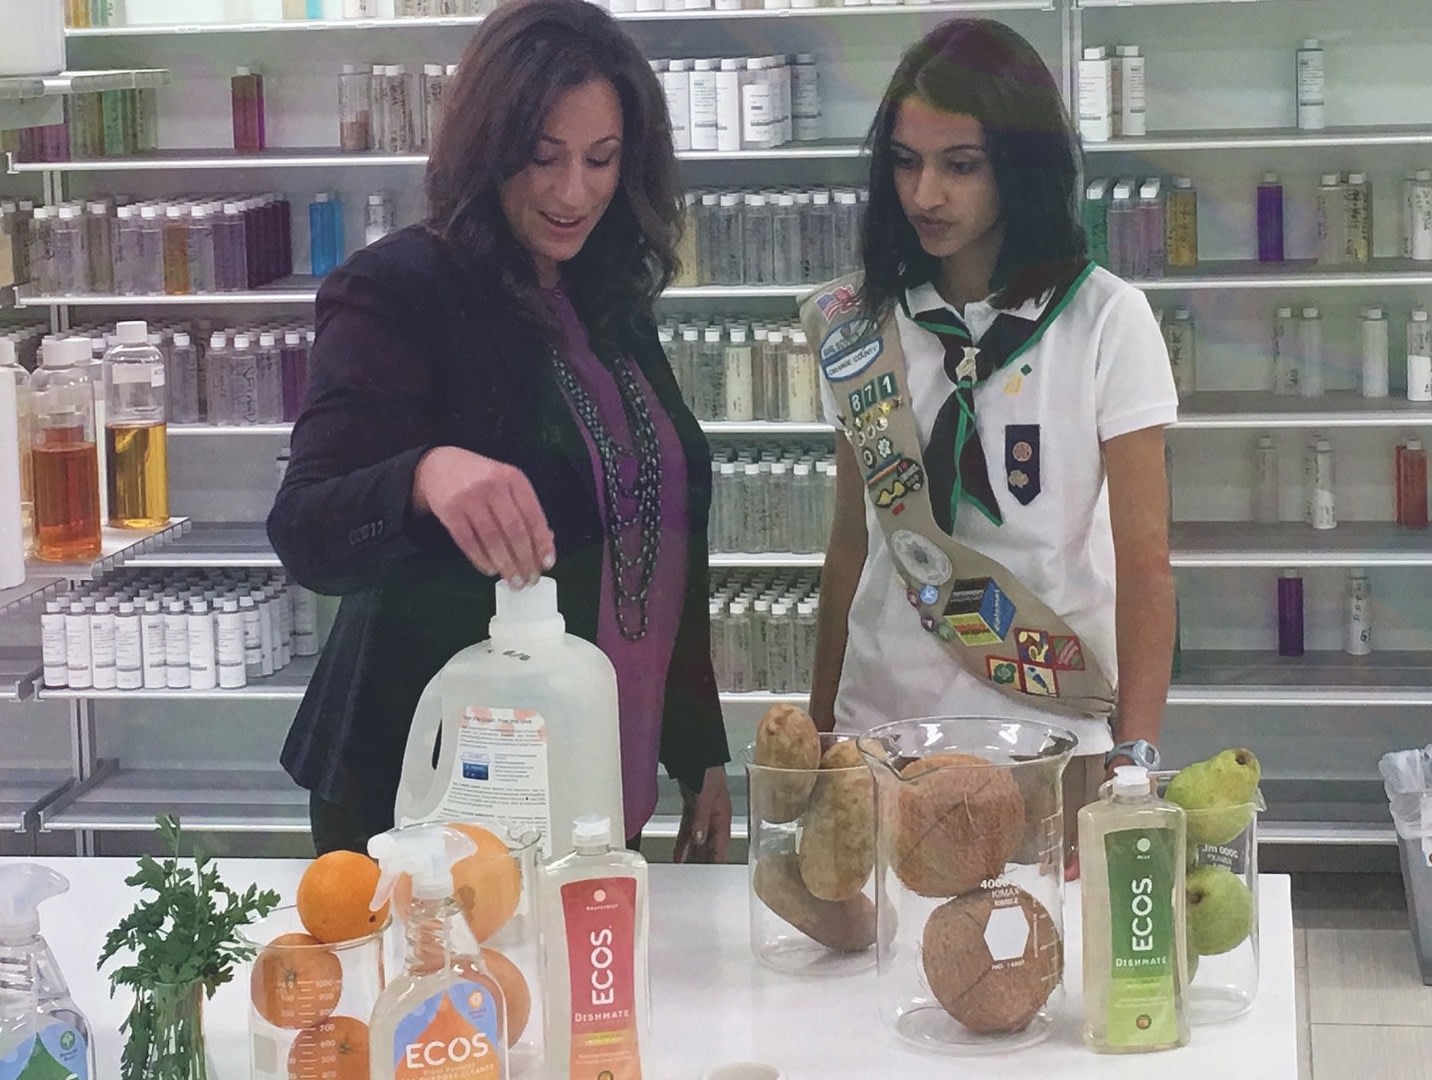 Woman Speaking To Girl About Earth Friendly Products